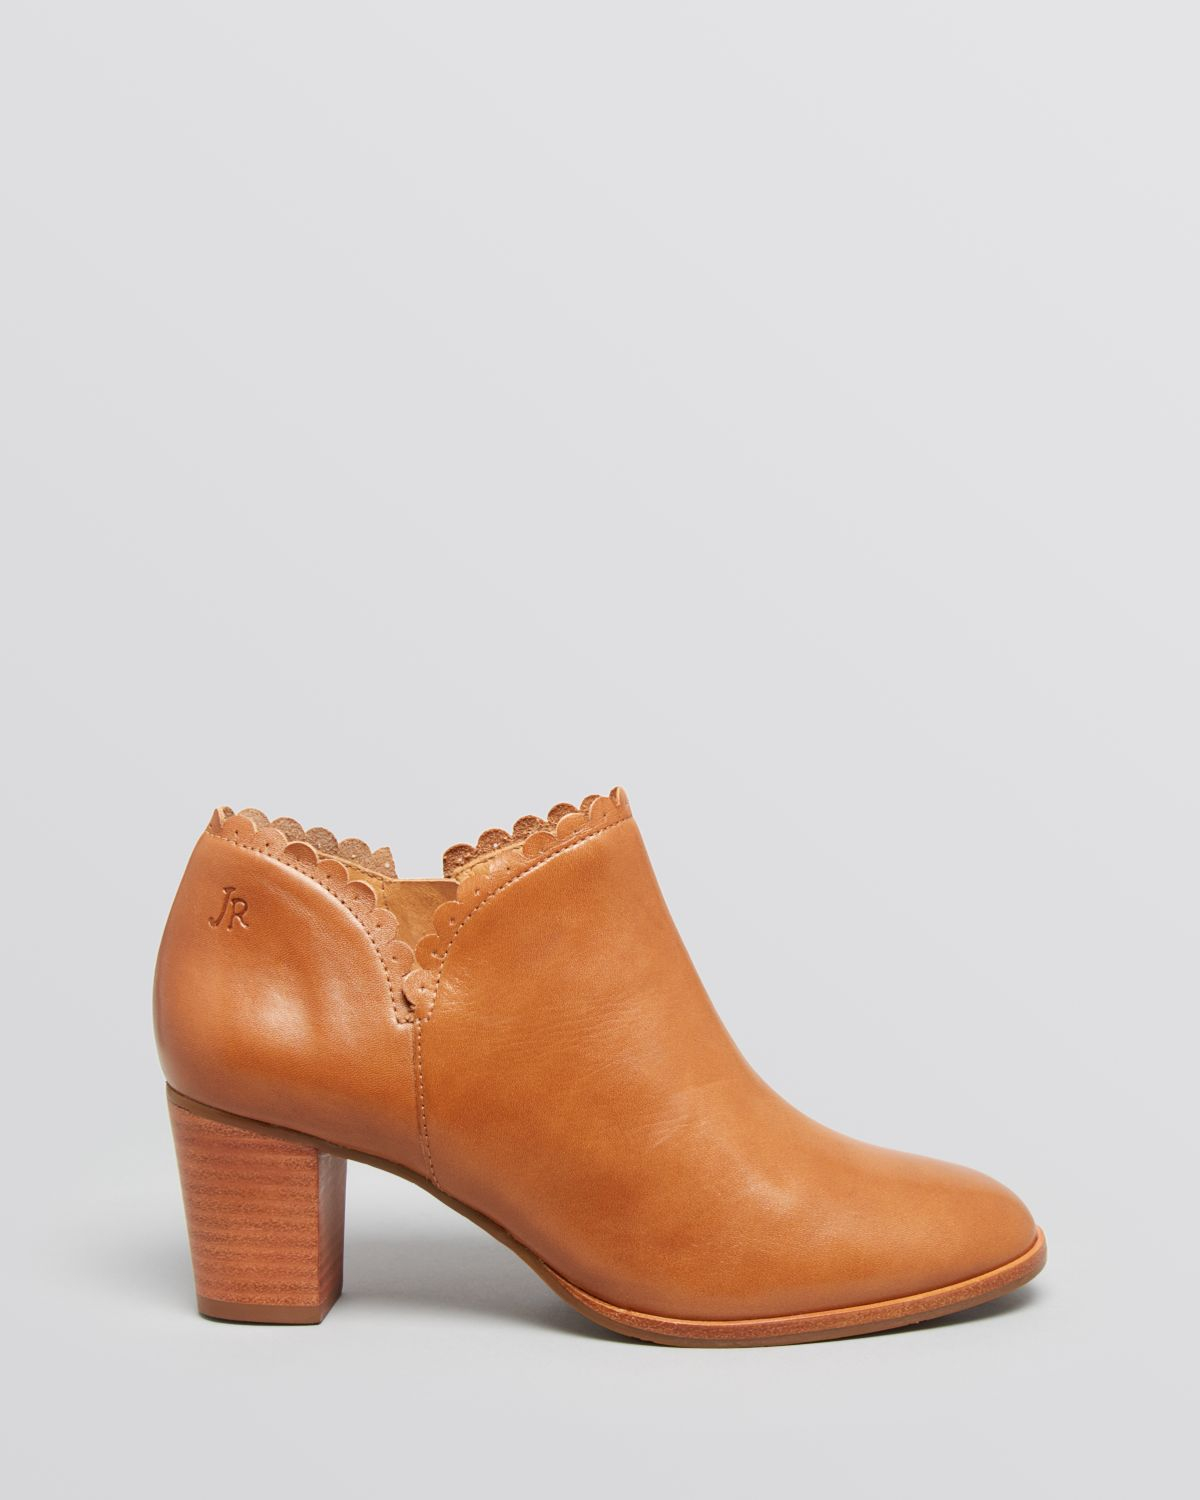 jack rogers marianne leather bootie